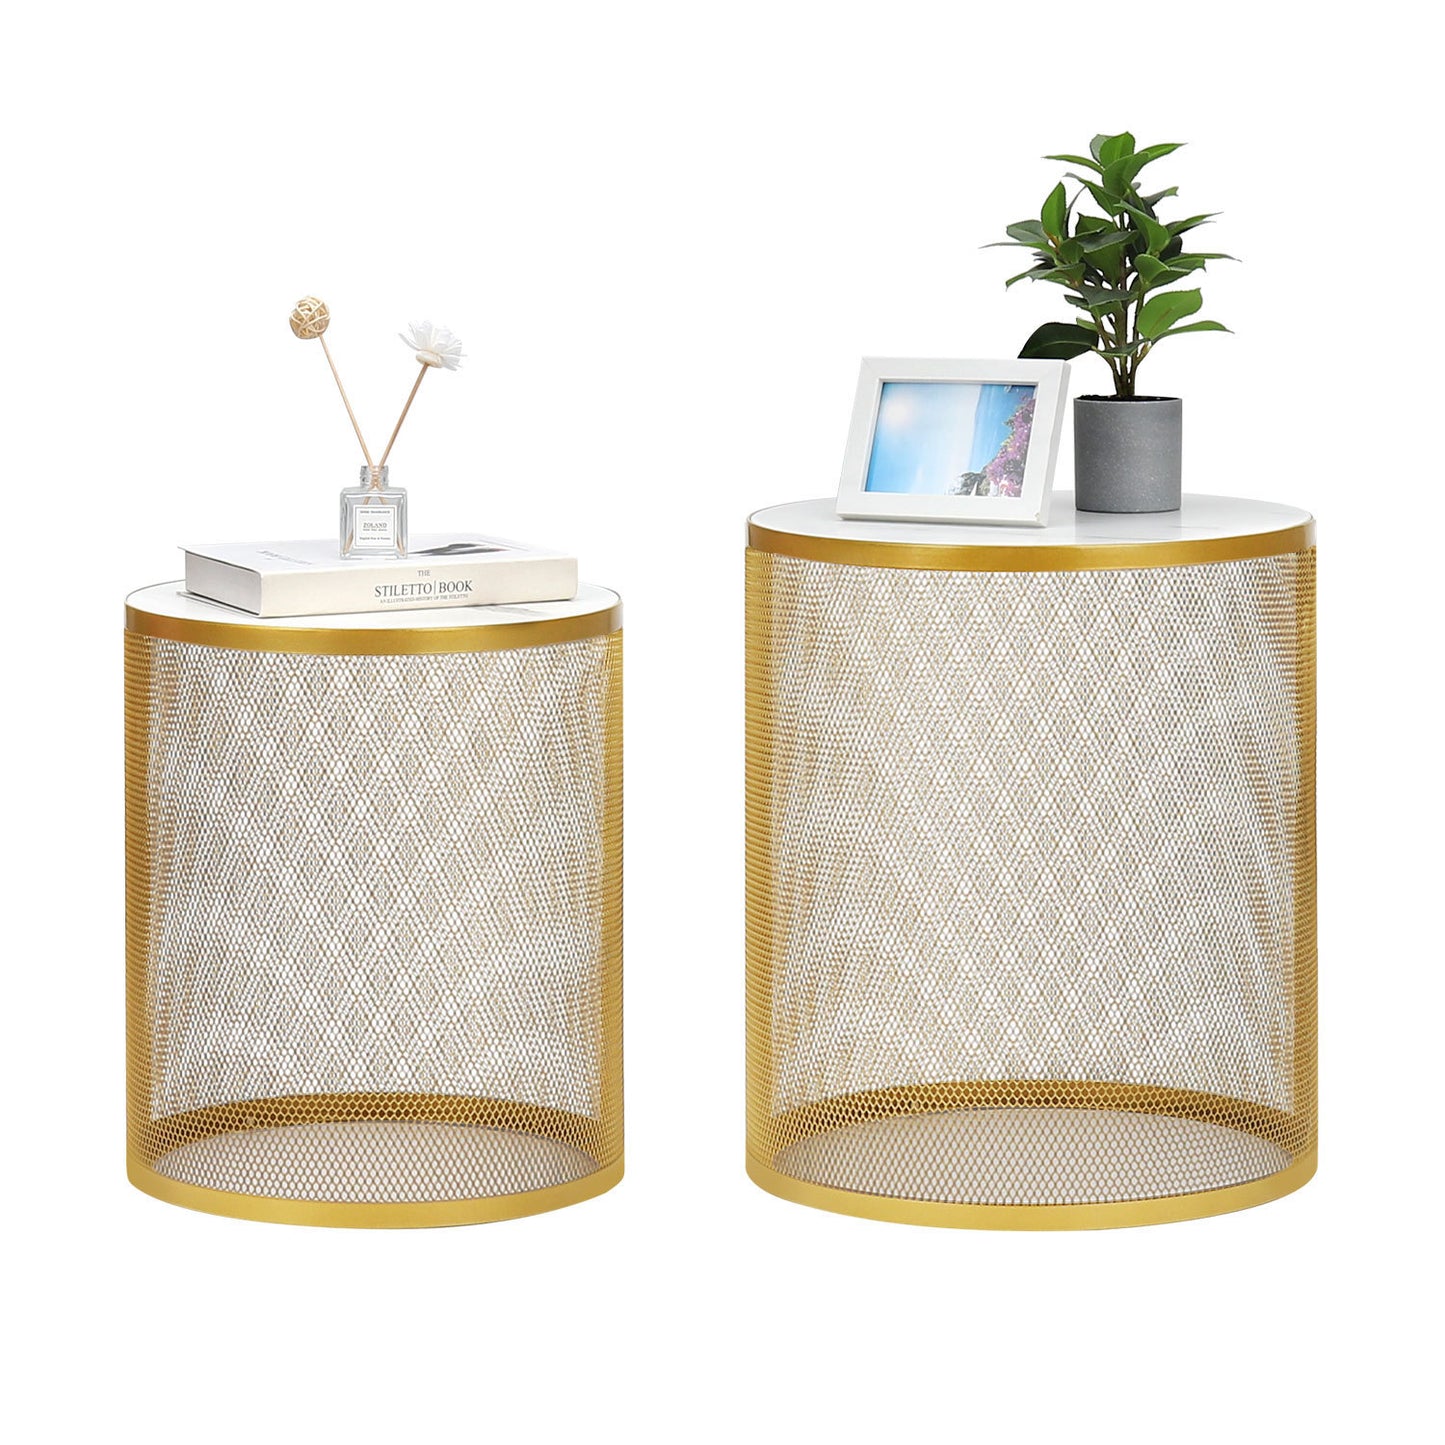 Metal Round End / Side Tables Nesting Nightstands Set of 2 in Golden White